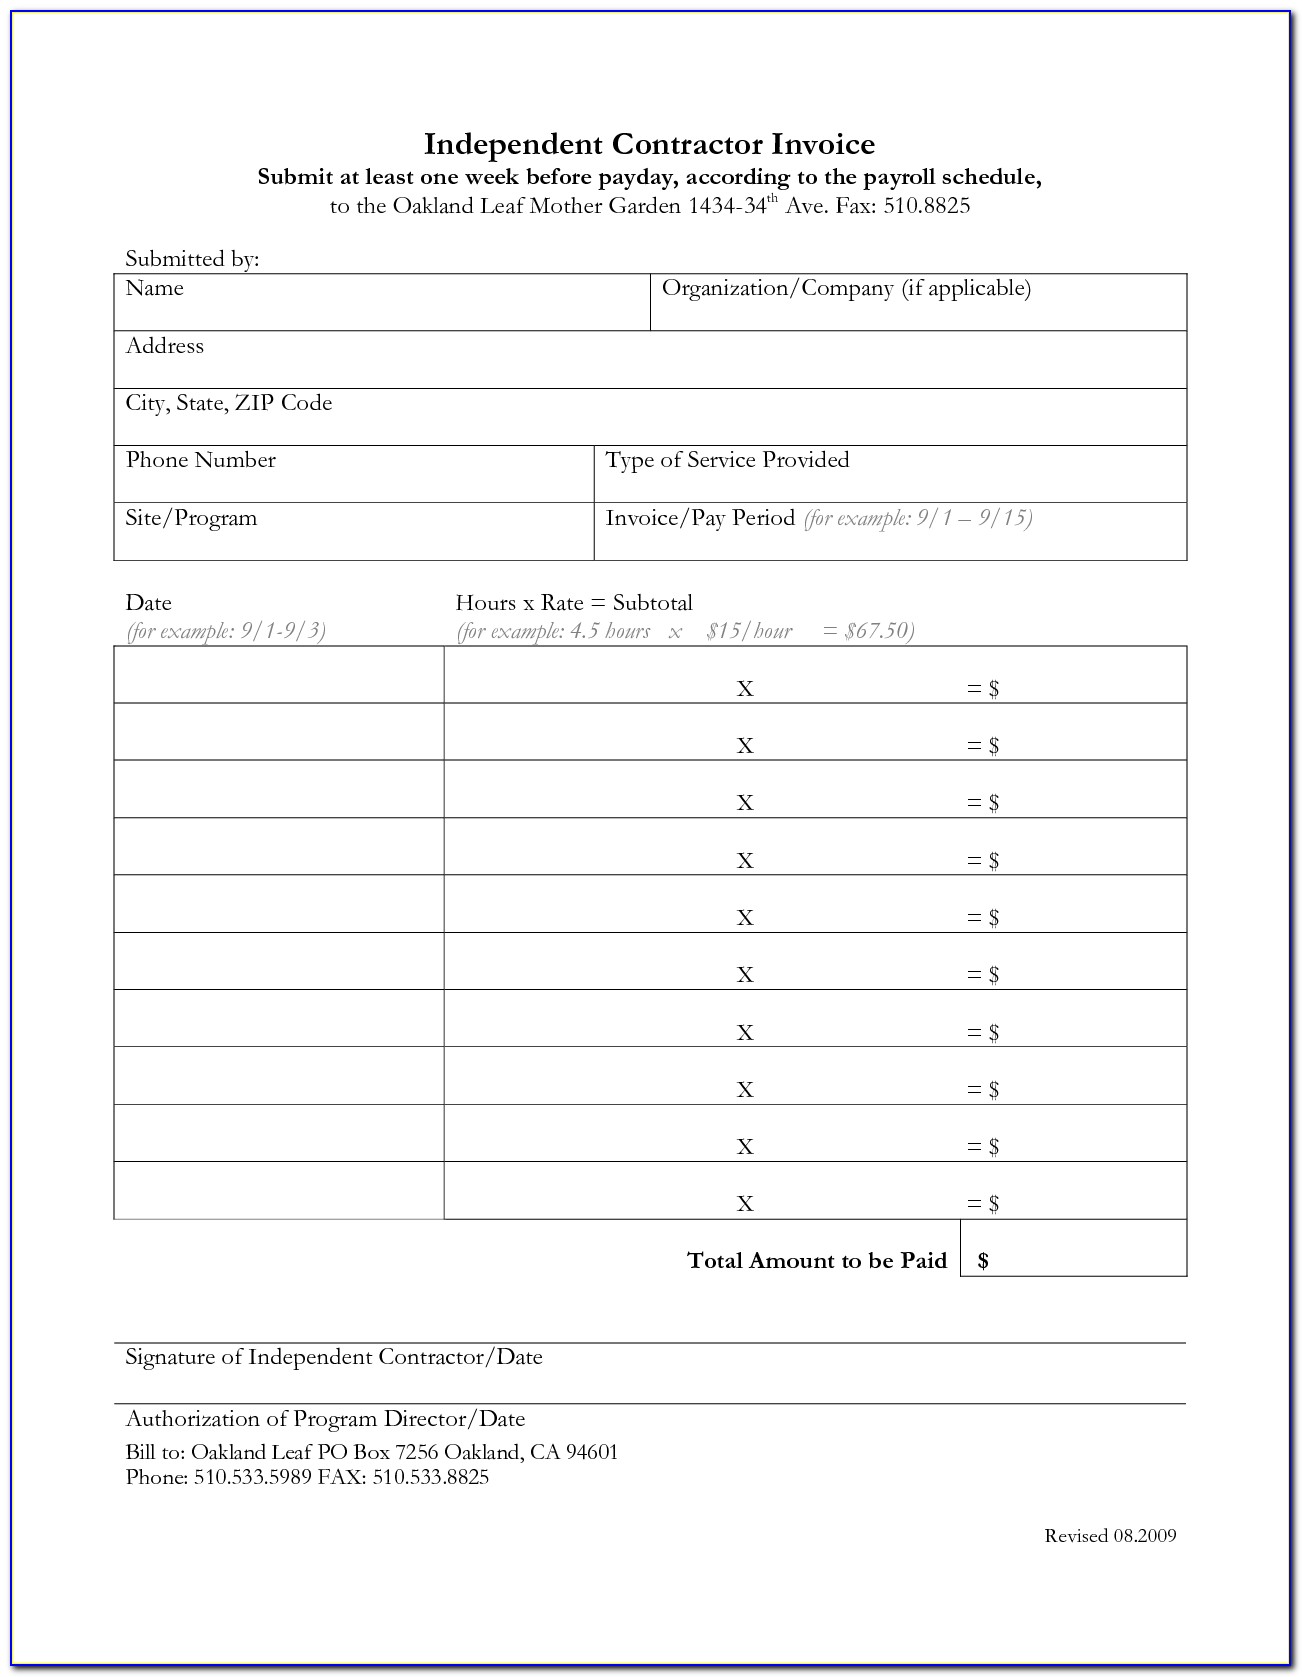 Independent Contractor Invoice Templates